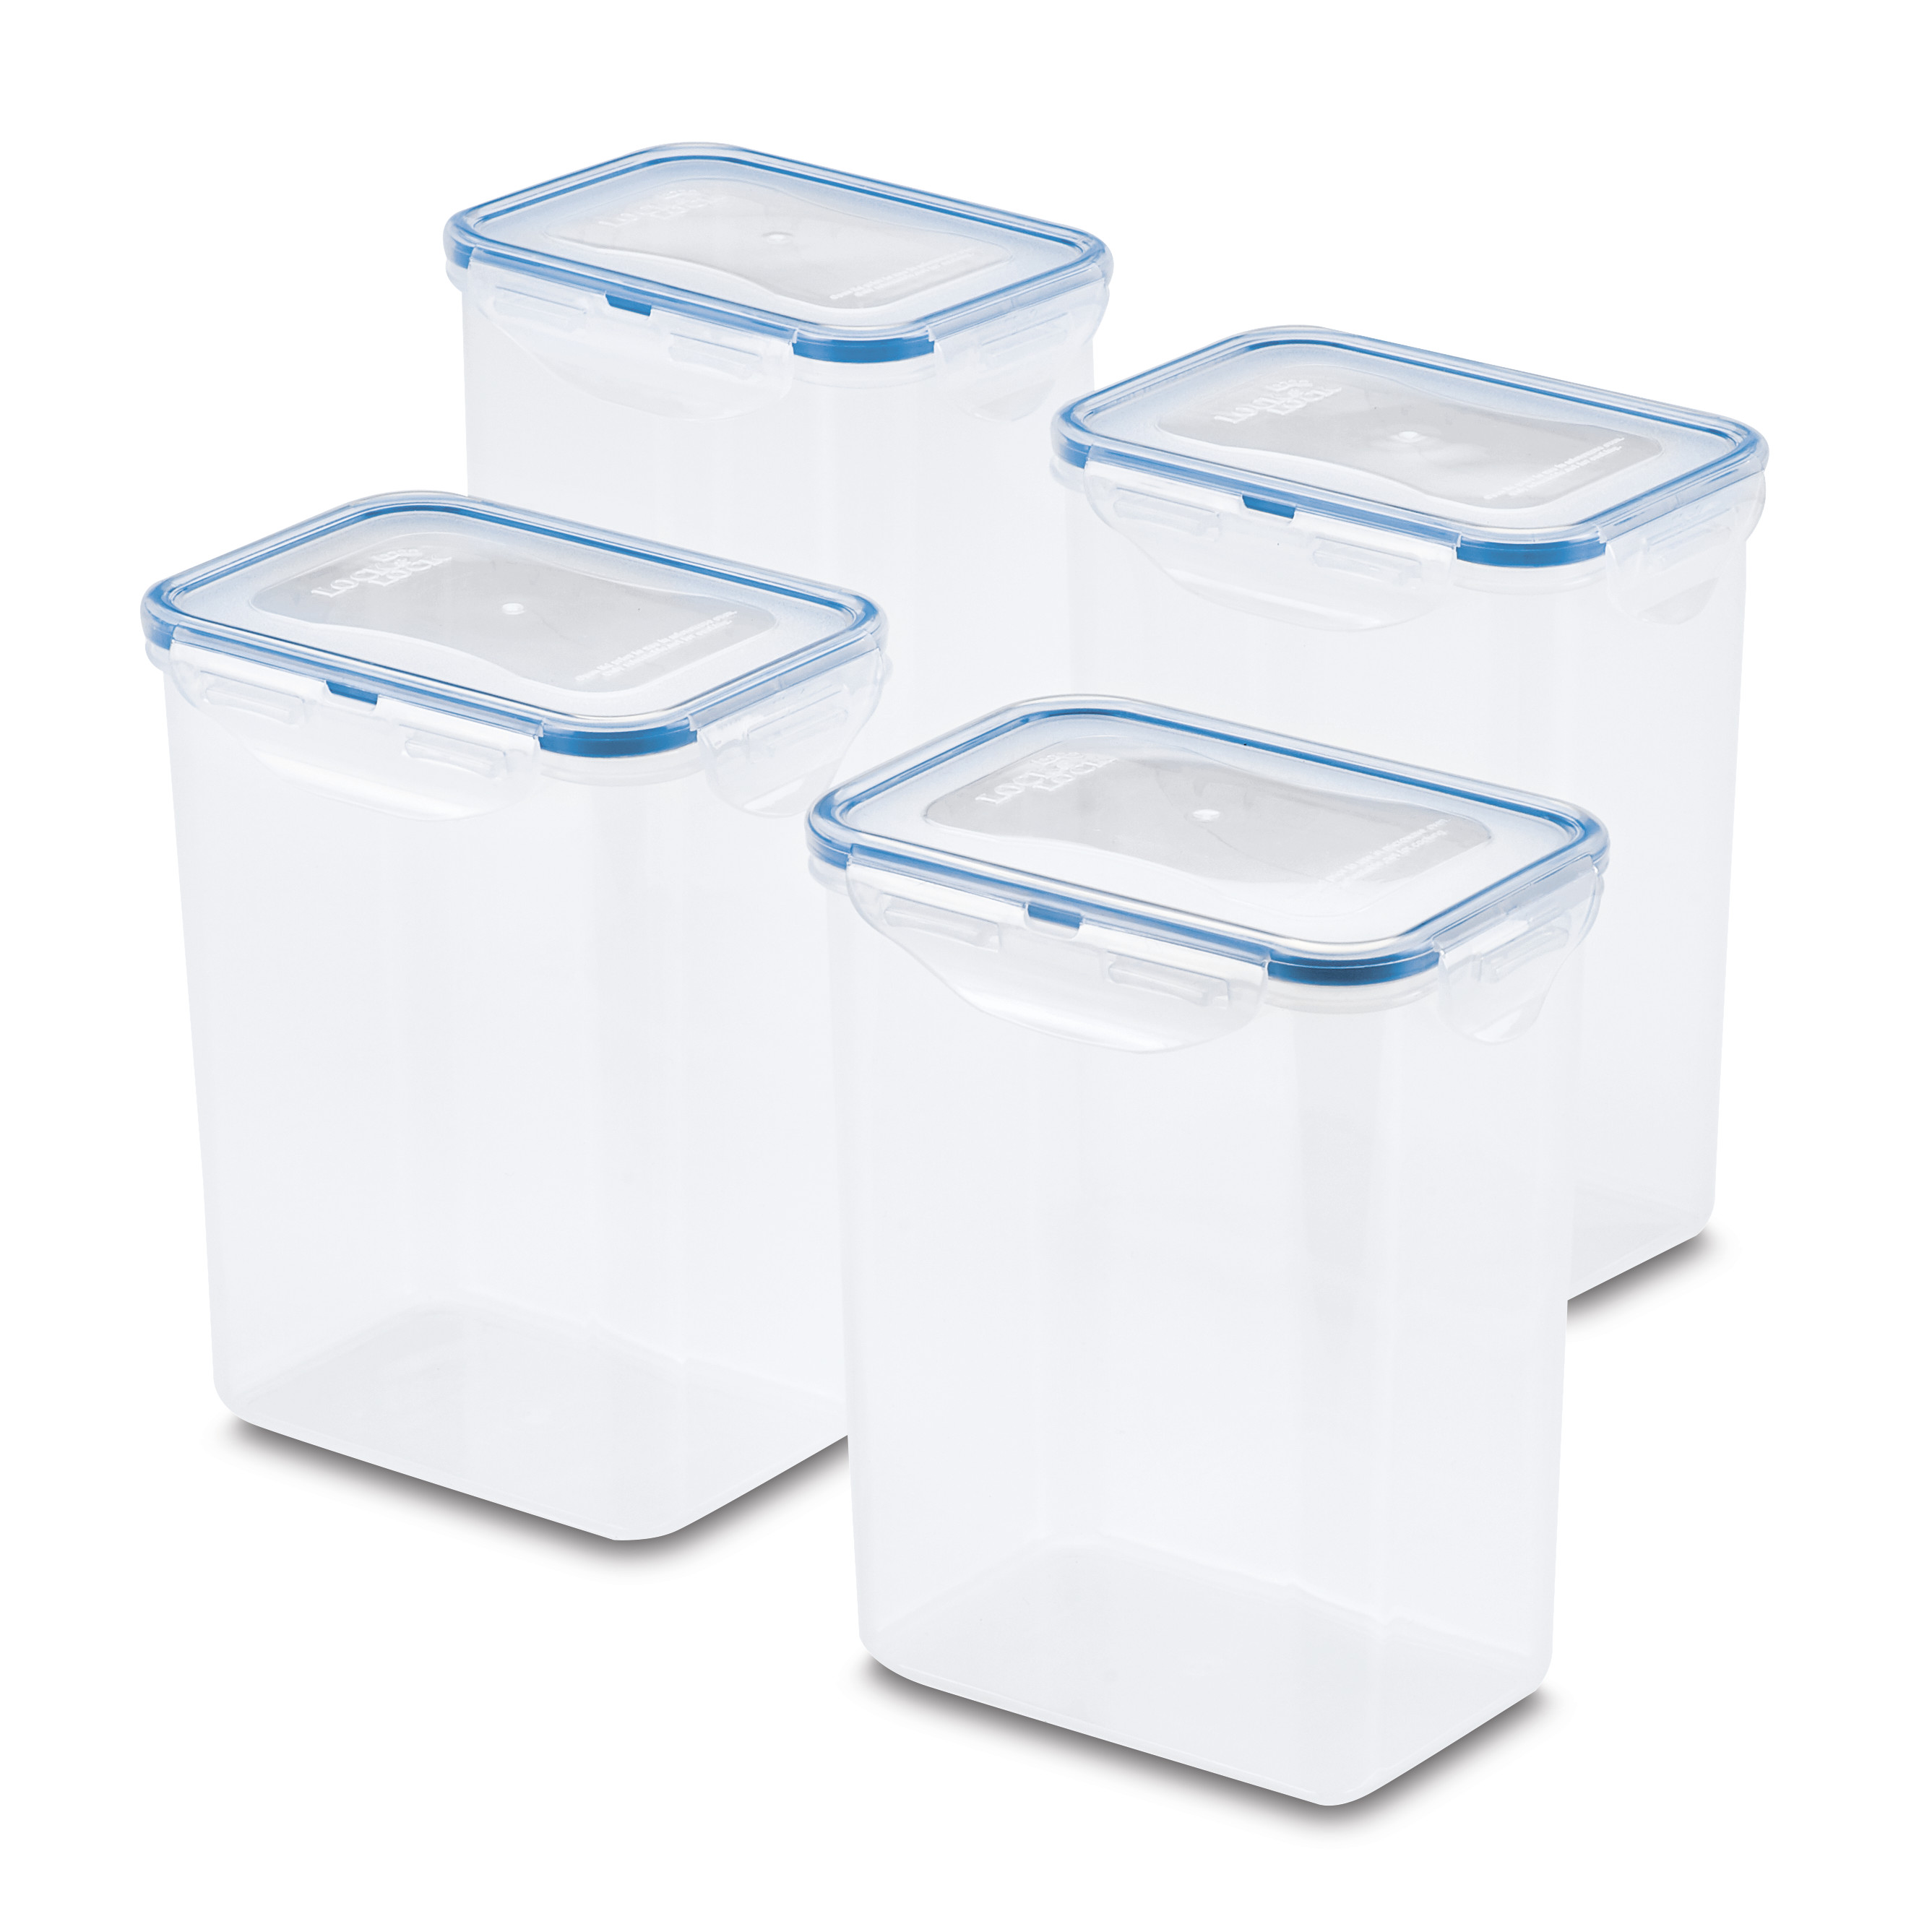 LocknLock Pantry 7.6-Cup Rectangular Food Storage Container, Set of 4 - image 2 of 3